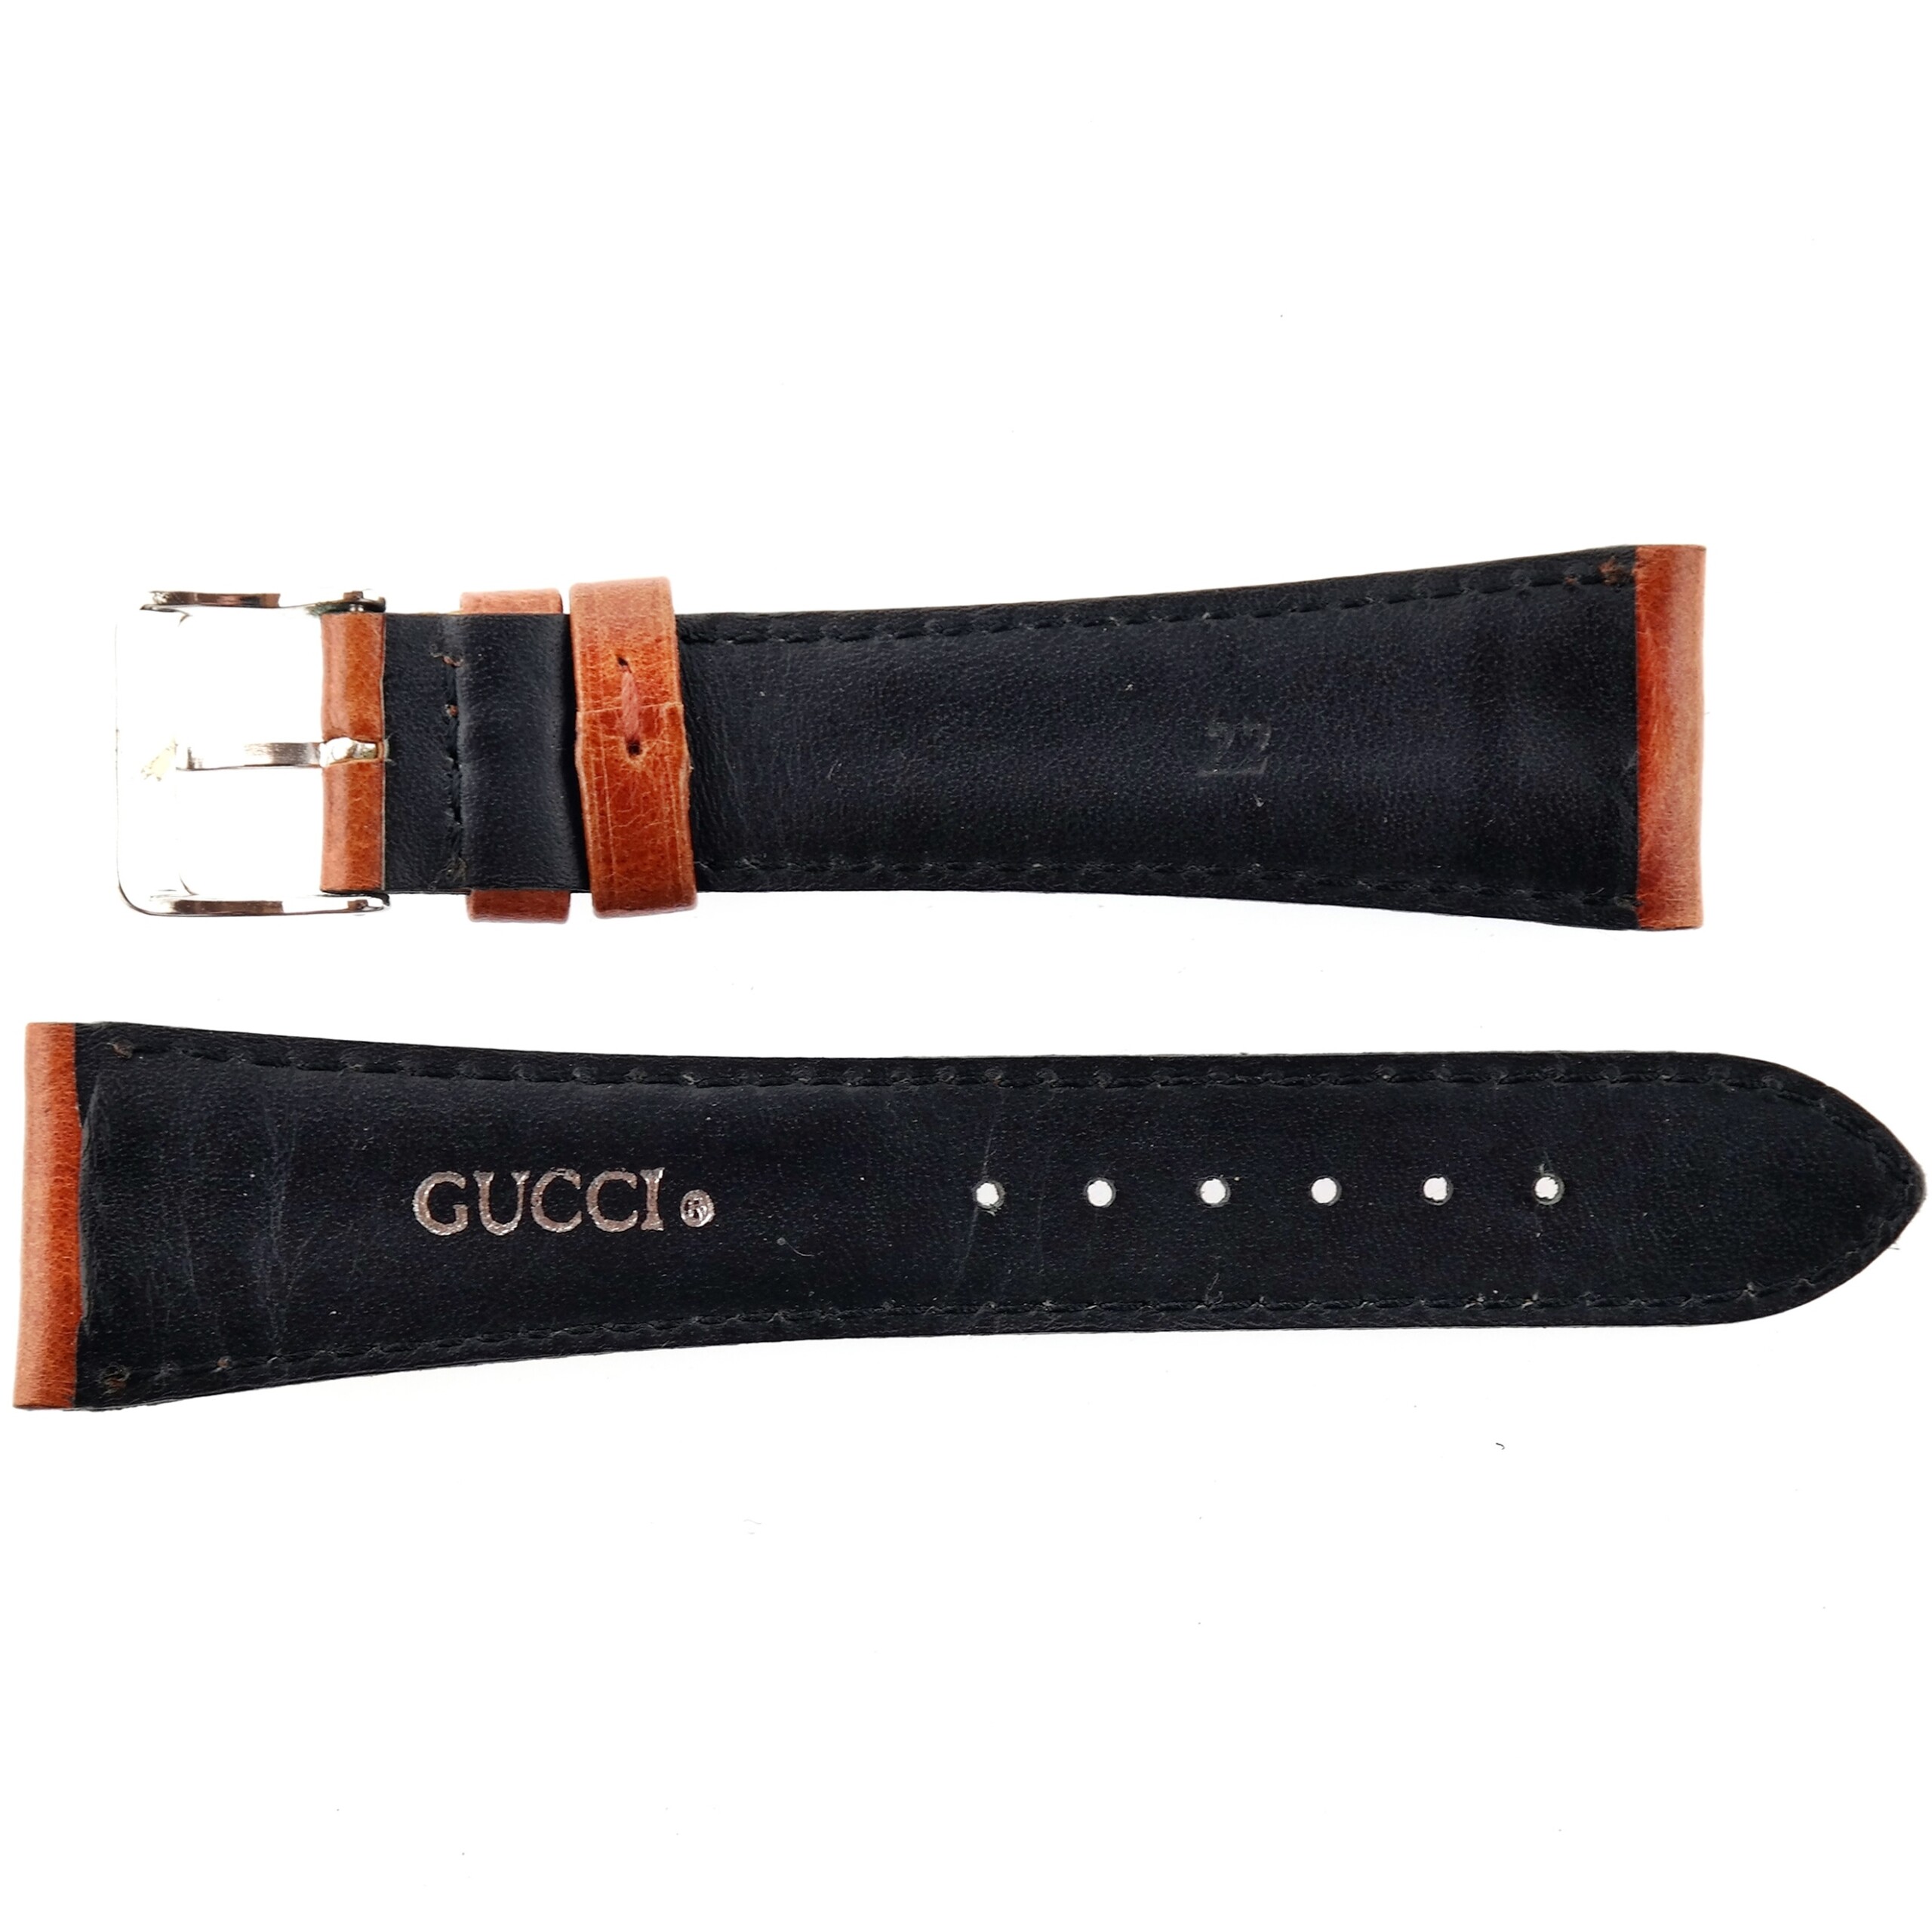 Authentic GUCCI Watch Strap - Brown, Blue or Green Leather - 22 mm